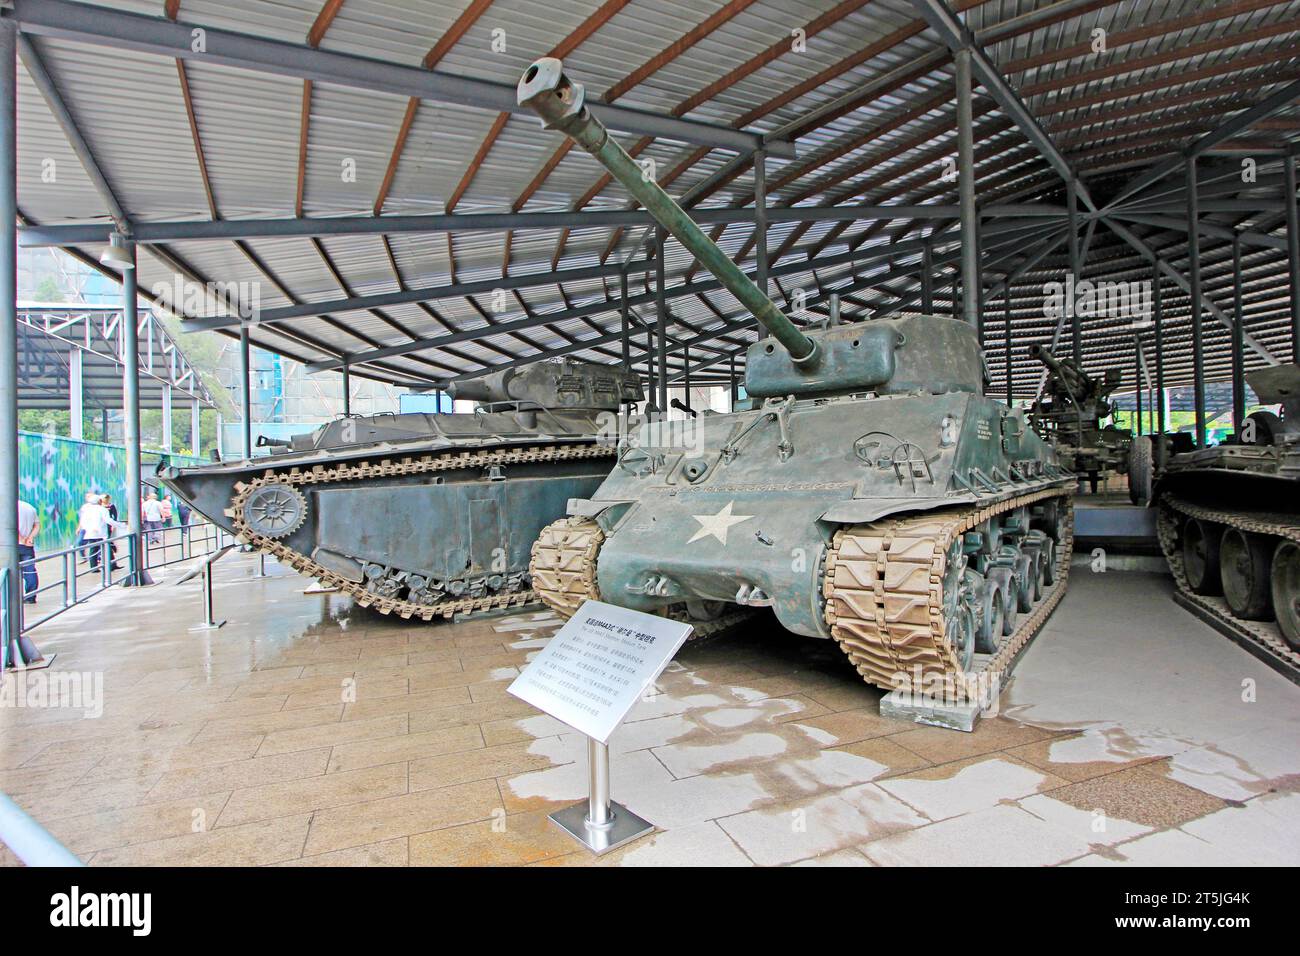 BEIJING - MAY 24: American M4A1 type 'Sherman' medium tank, in the Chinese military museum, on may 24, 2014, Beijing, China Stock Photo